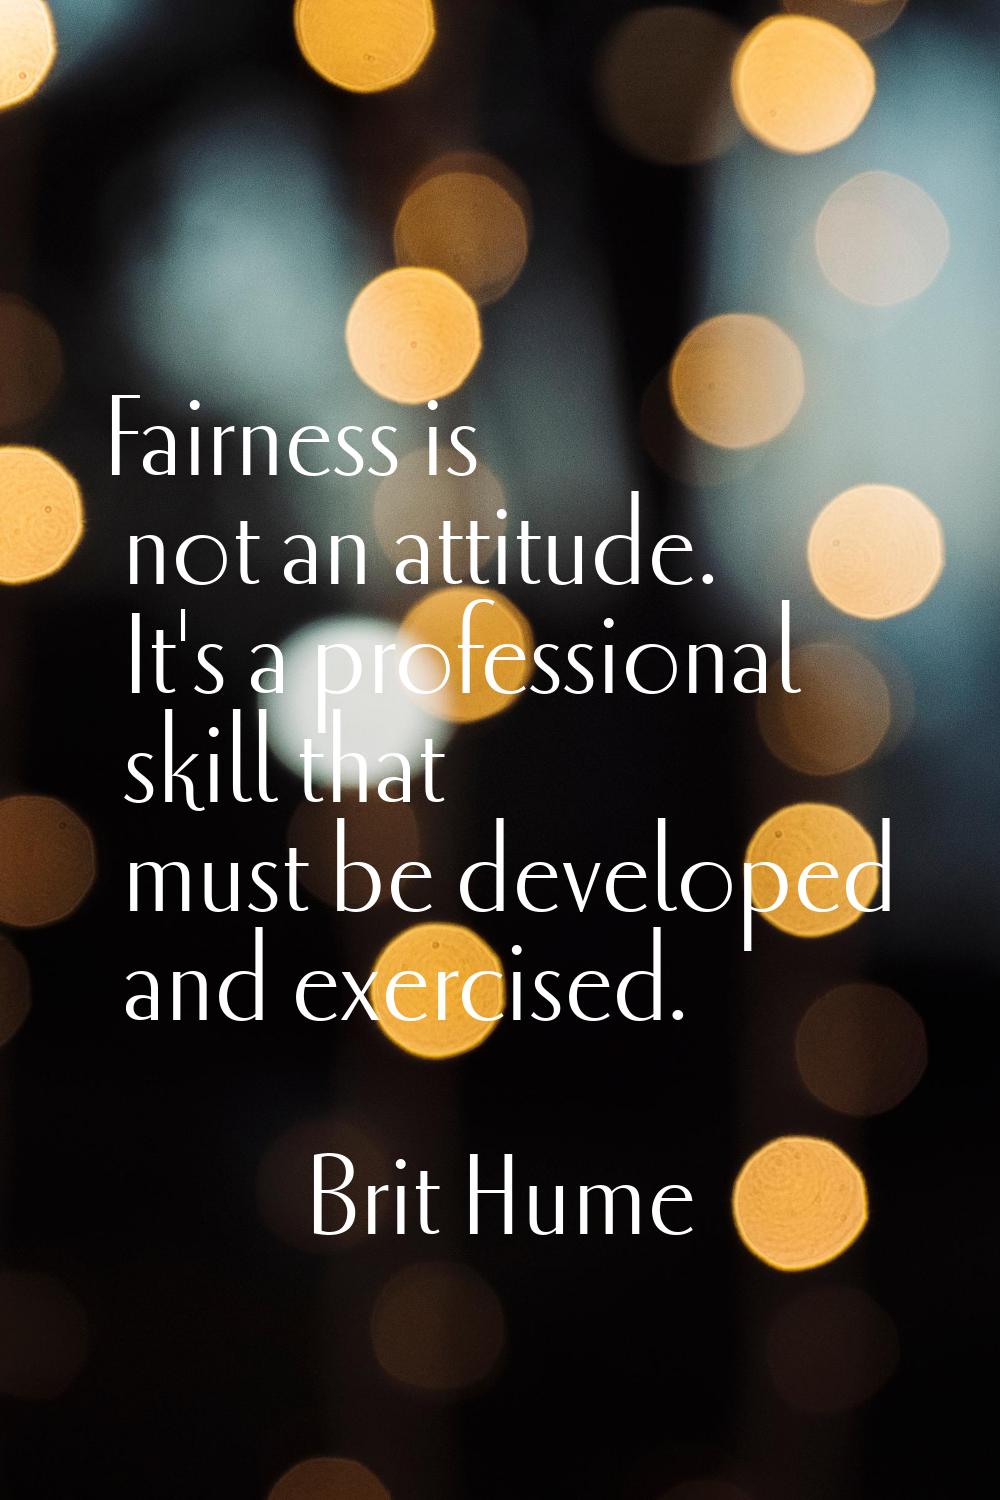 Fairness is not an attitude. It's a professional skill that must be developed and exercised.